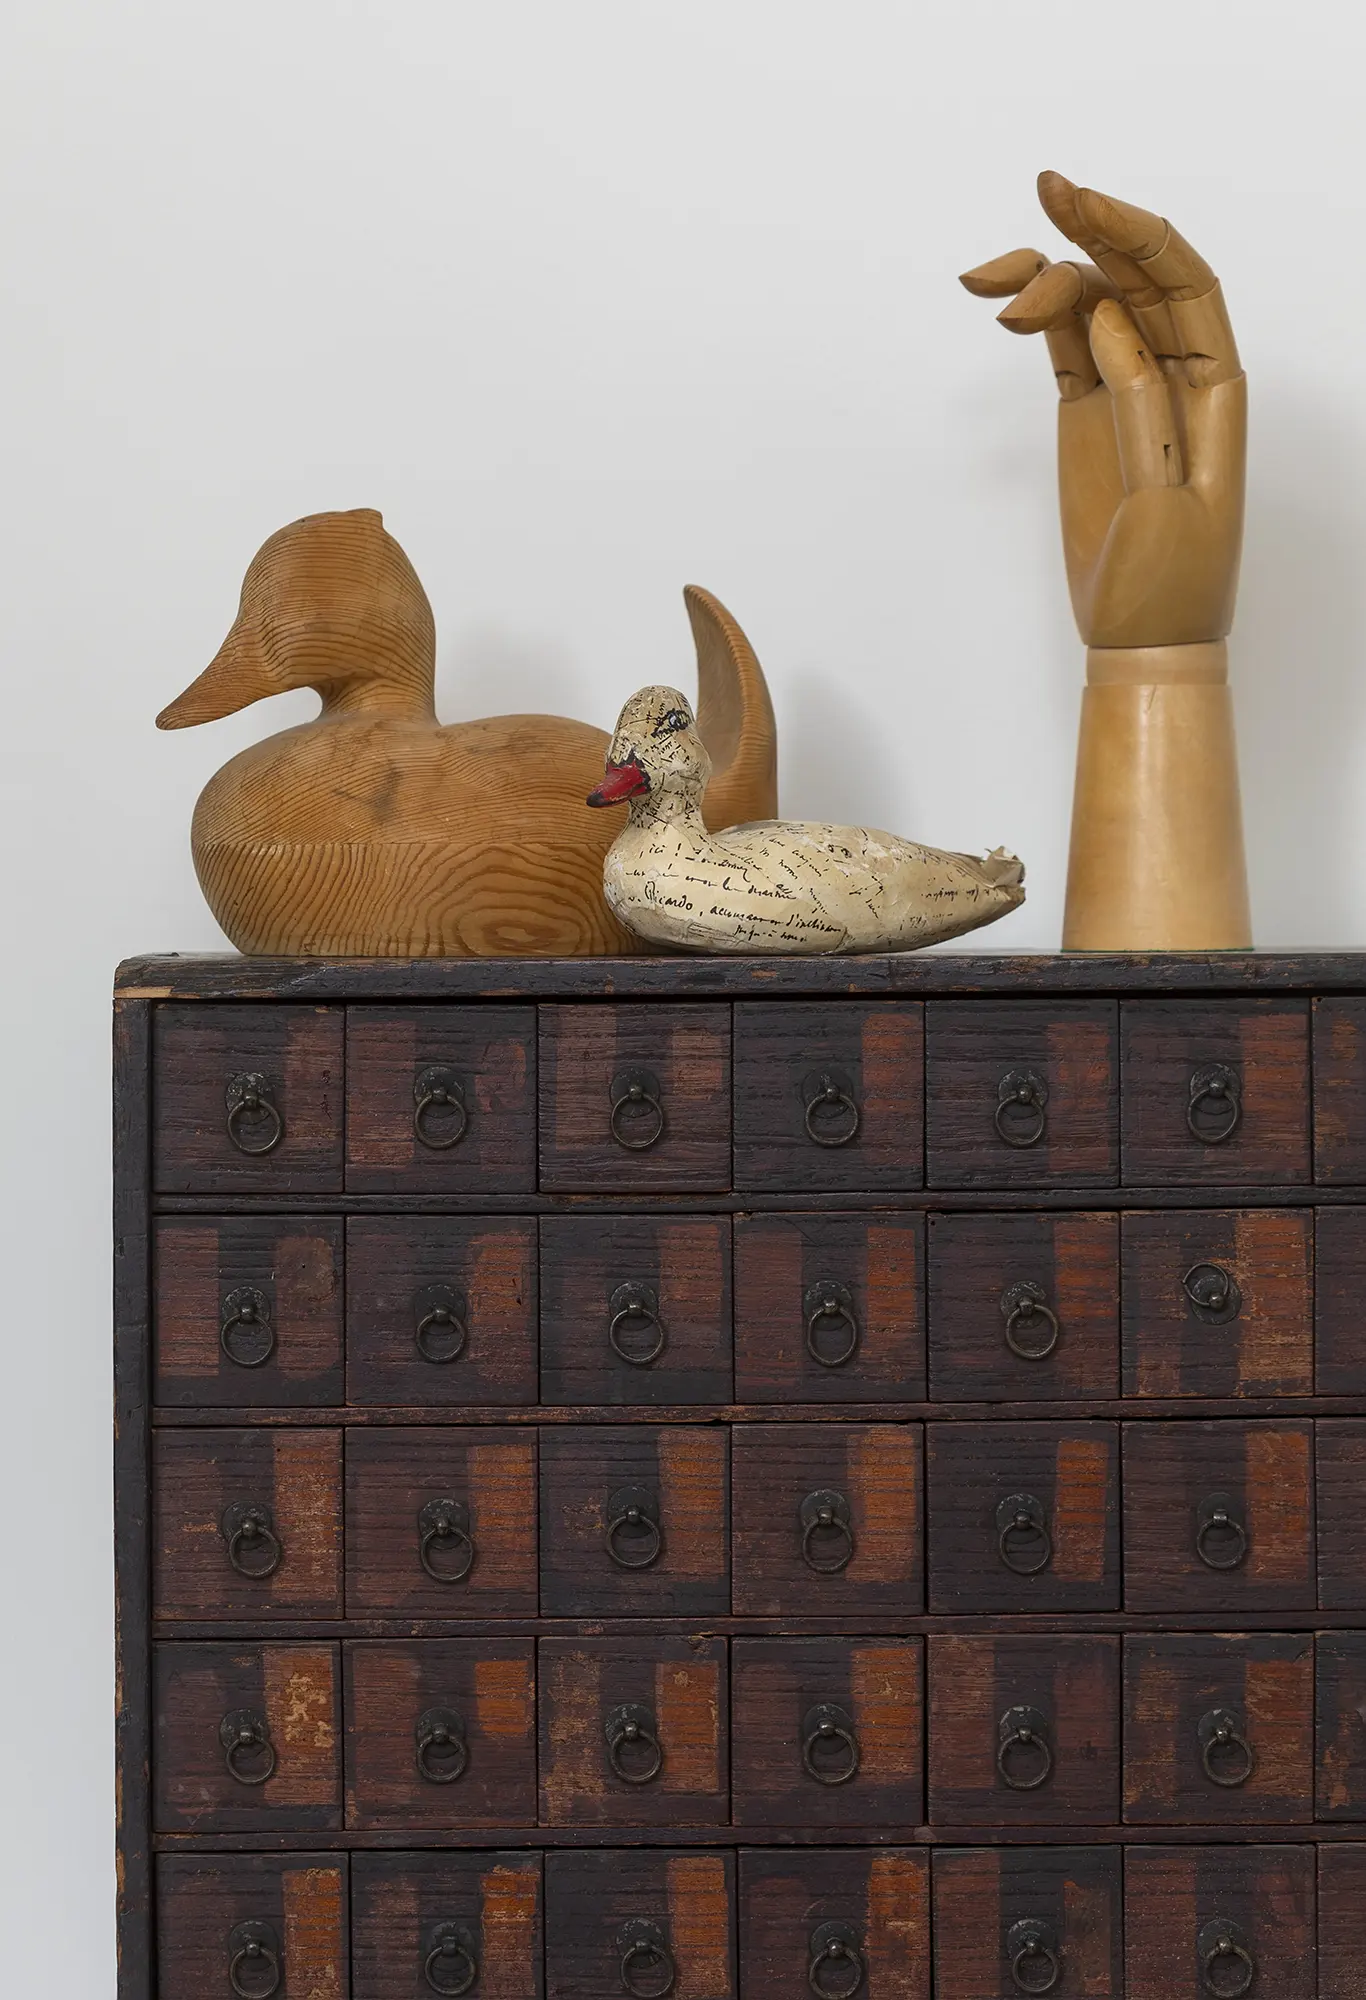 Wooden duck and wooden hand on top of small drawers